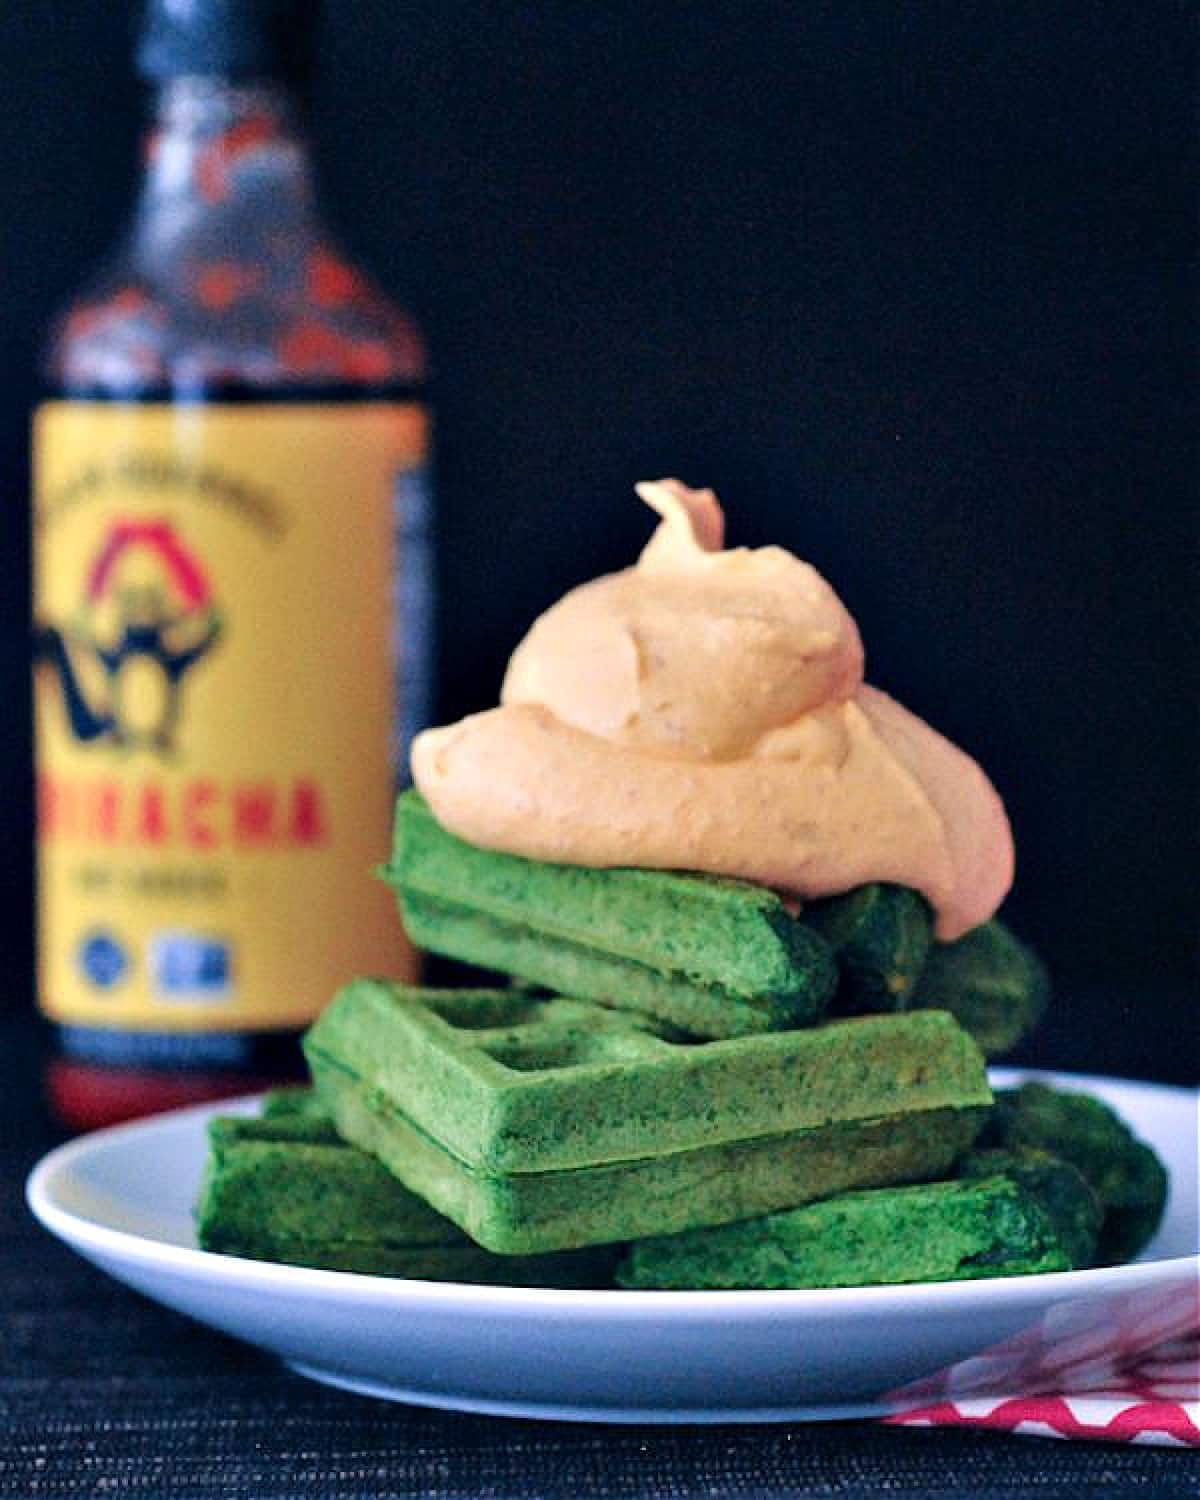 Bright green spinach waffles stacked three high on a white plate, topped with orange colored sriracha whip cream. Sriracha hot sauce bottle in background.